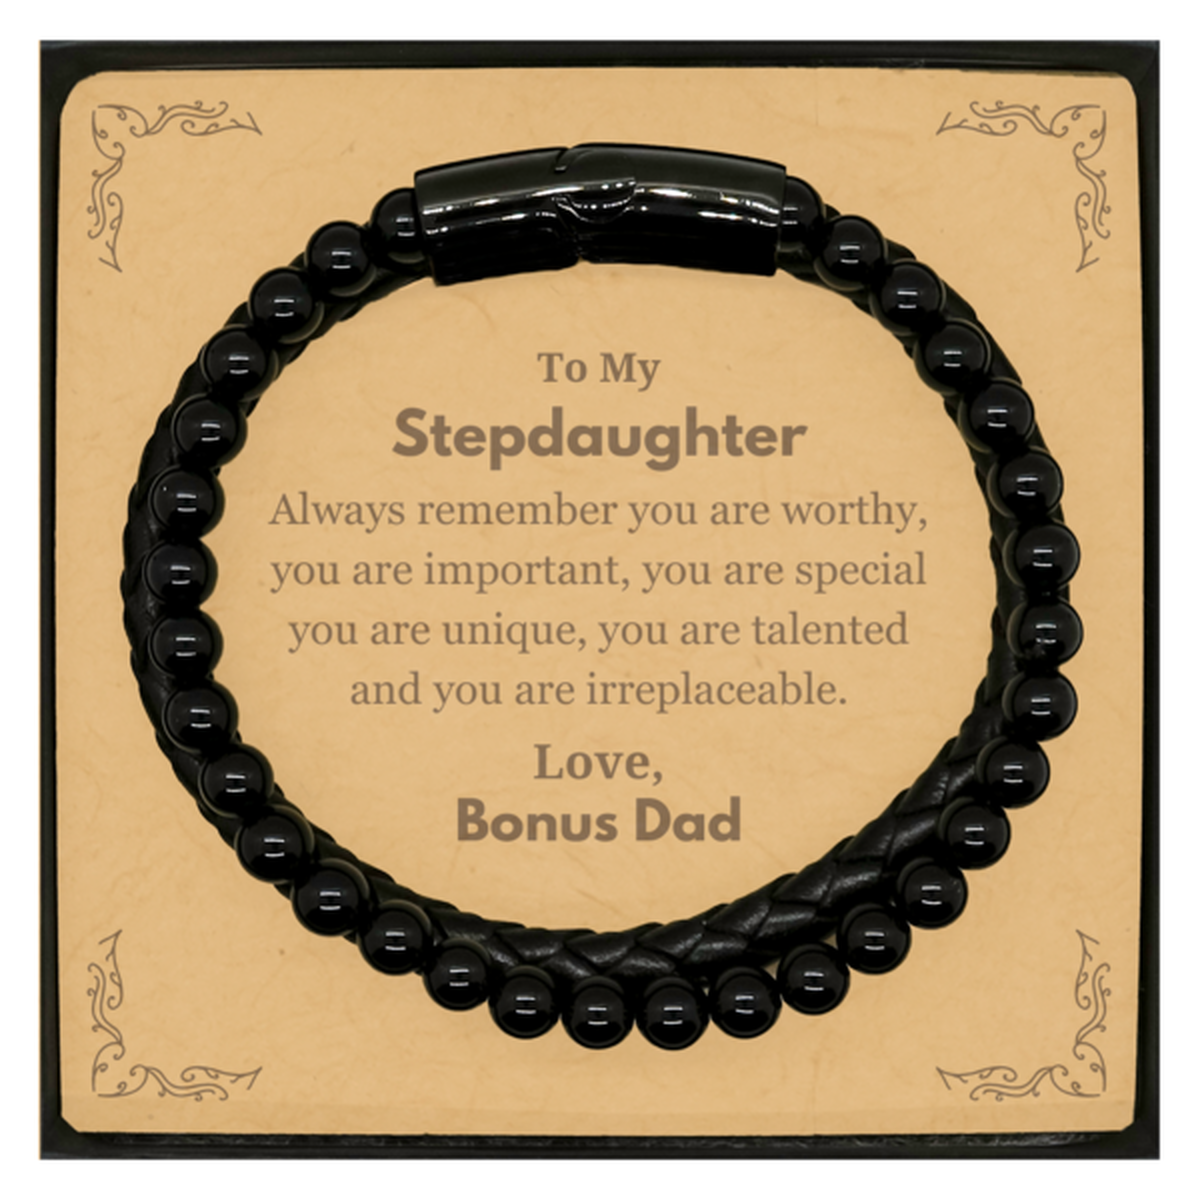 Stepdaughter Birthday Gifts from Bonus Dad, Inspirational Stone Leather Bracelets for Stepdaughter Christmas Graduation Gifts for Stepdaughter Always remember you are worthy, you are important. Love, Bonus Dad